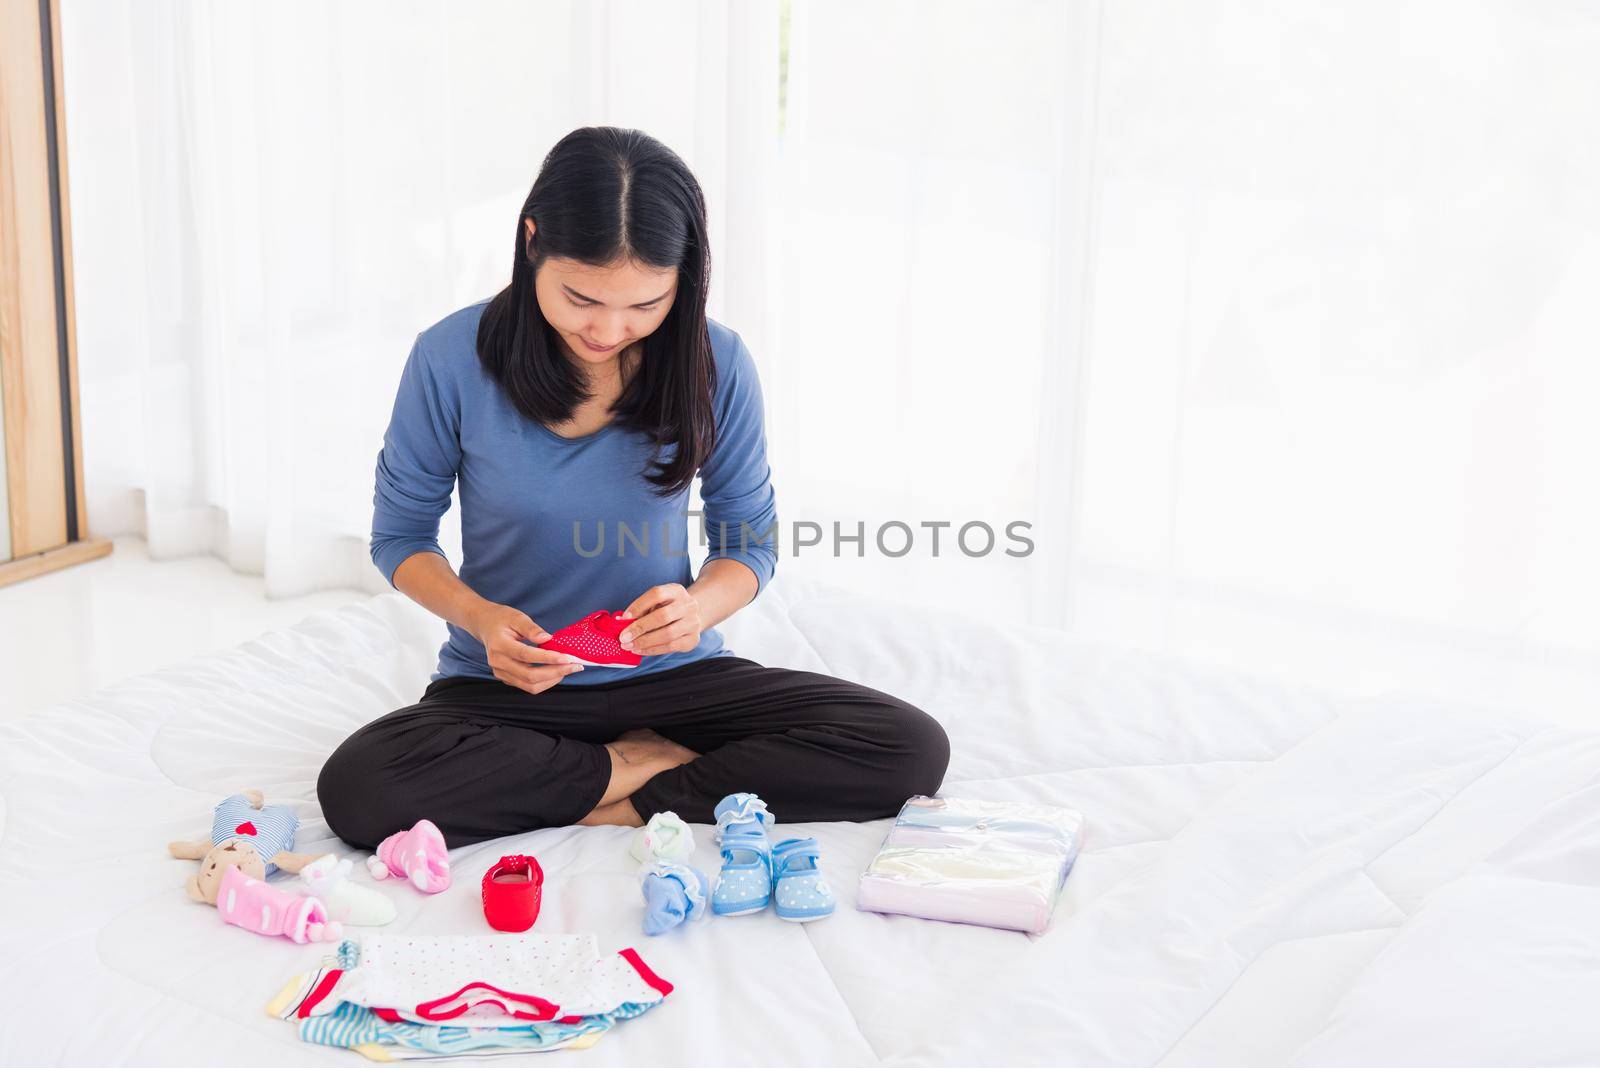 Asian mother preparing baby clothes resting and relaxing on the bed she makes purchase new baby clothes for after baby getting ready for newborn birth